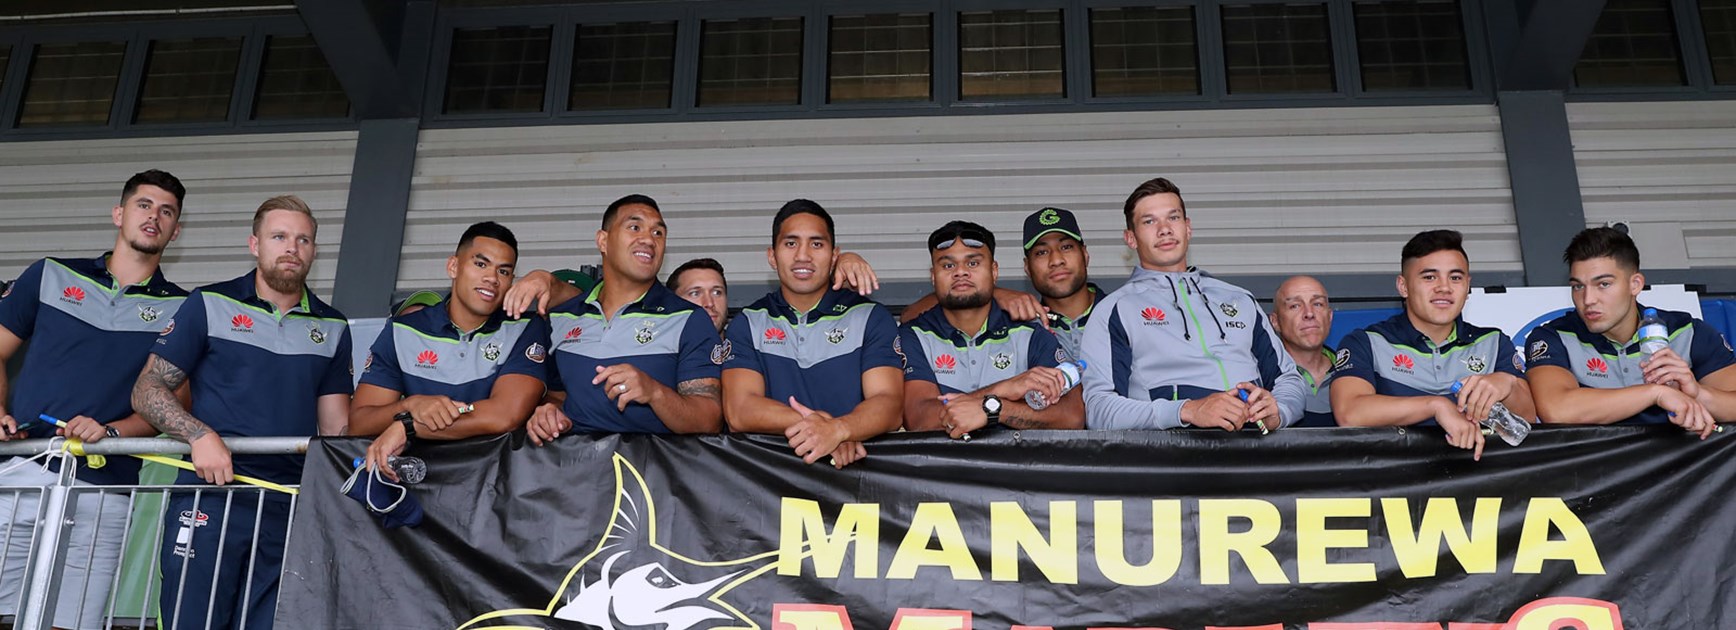 The Raiders were just one of a number of sides to visit the Manurewa Marlins in the lead up to the Auckland Nines.